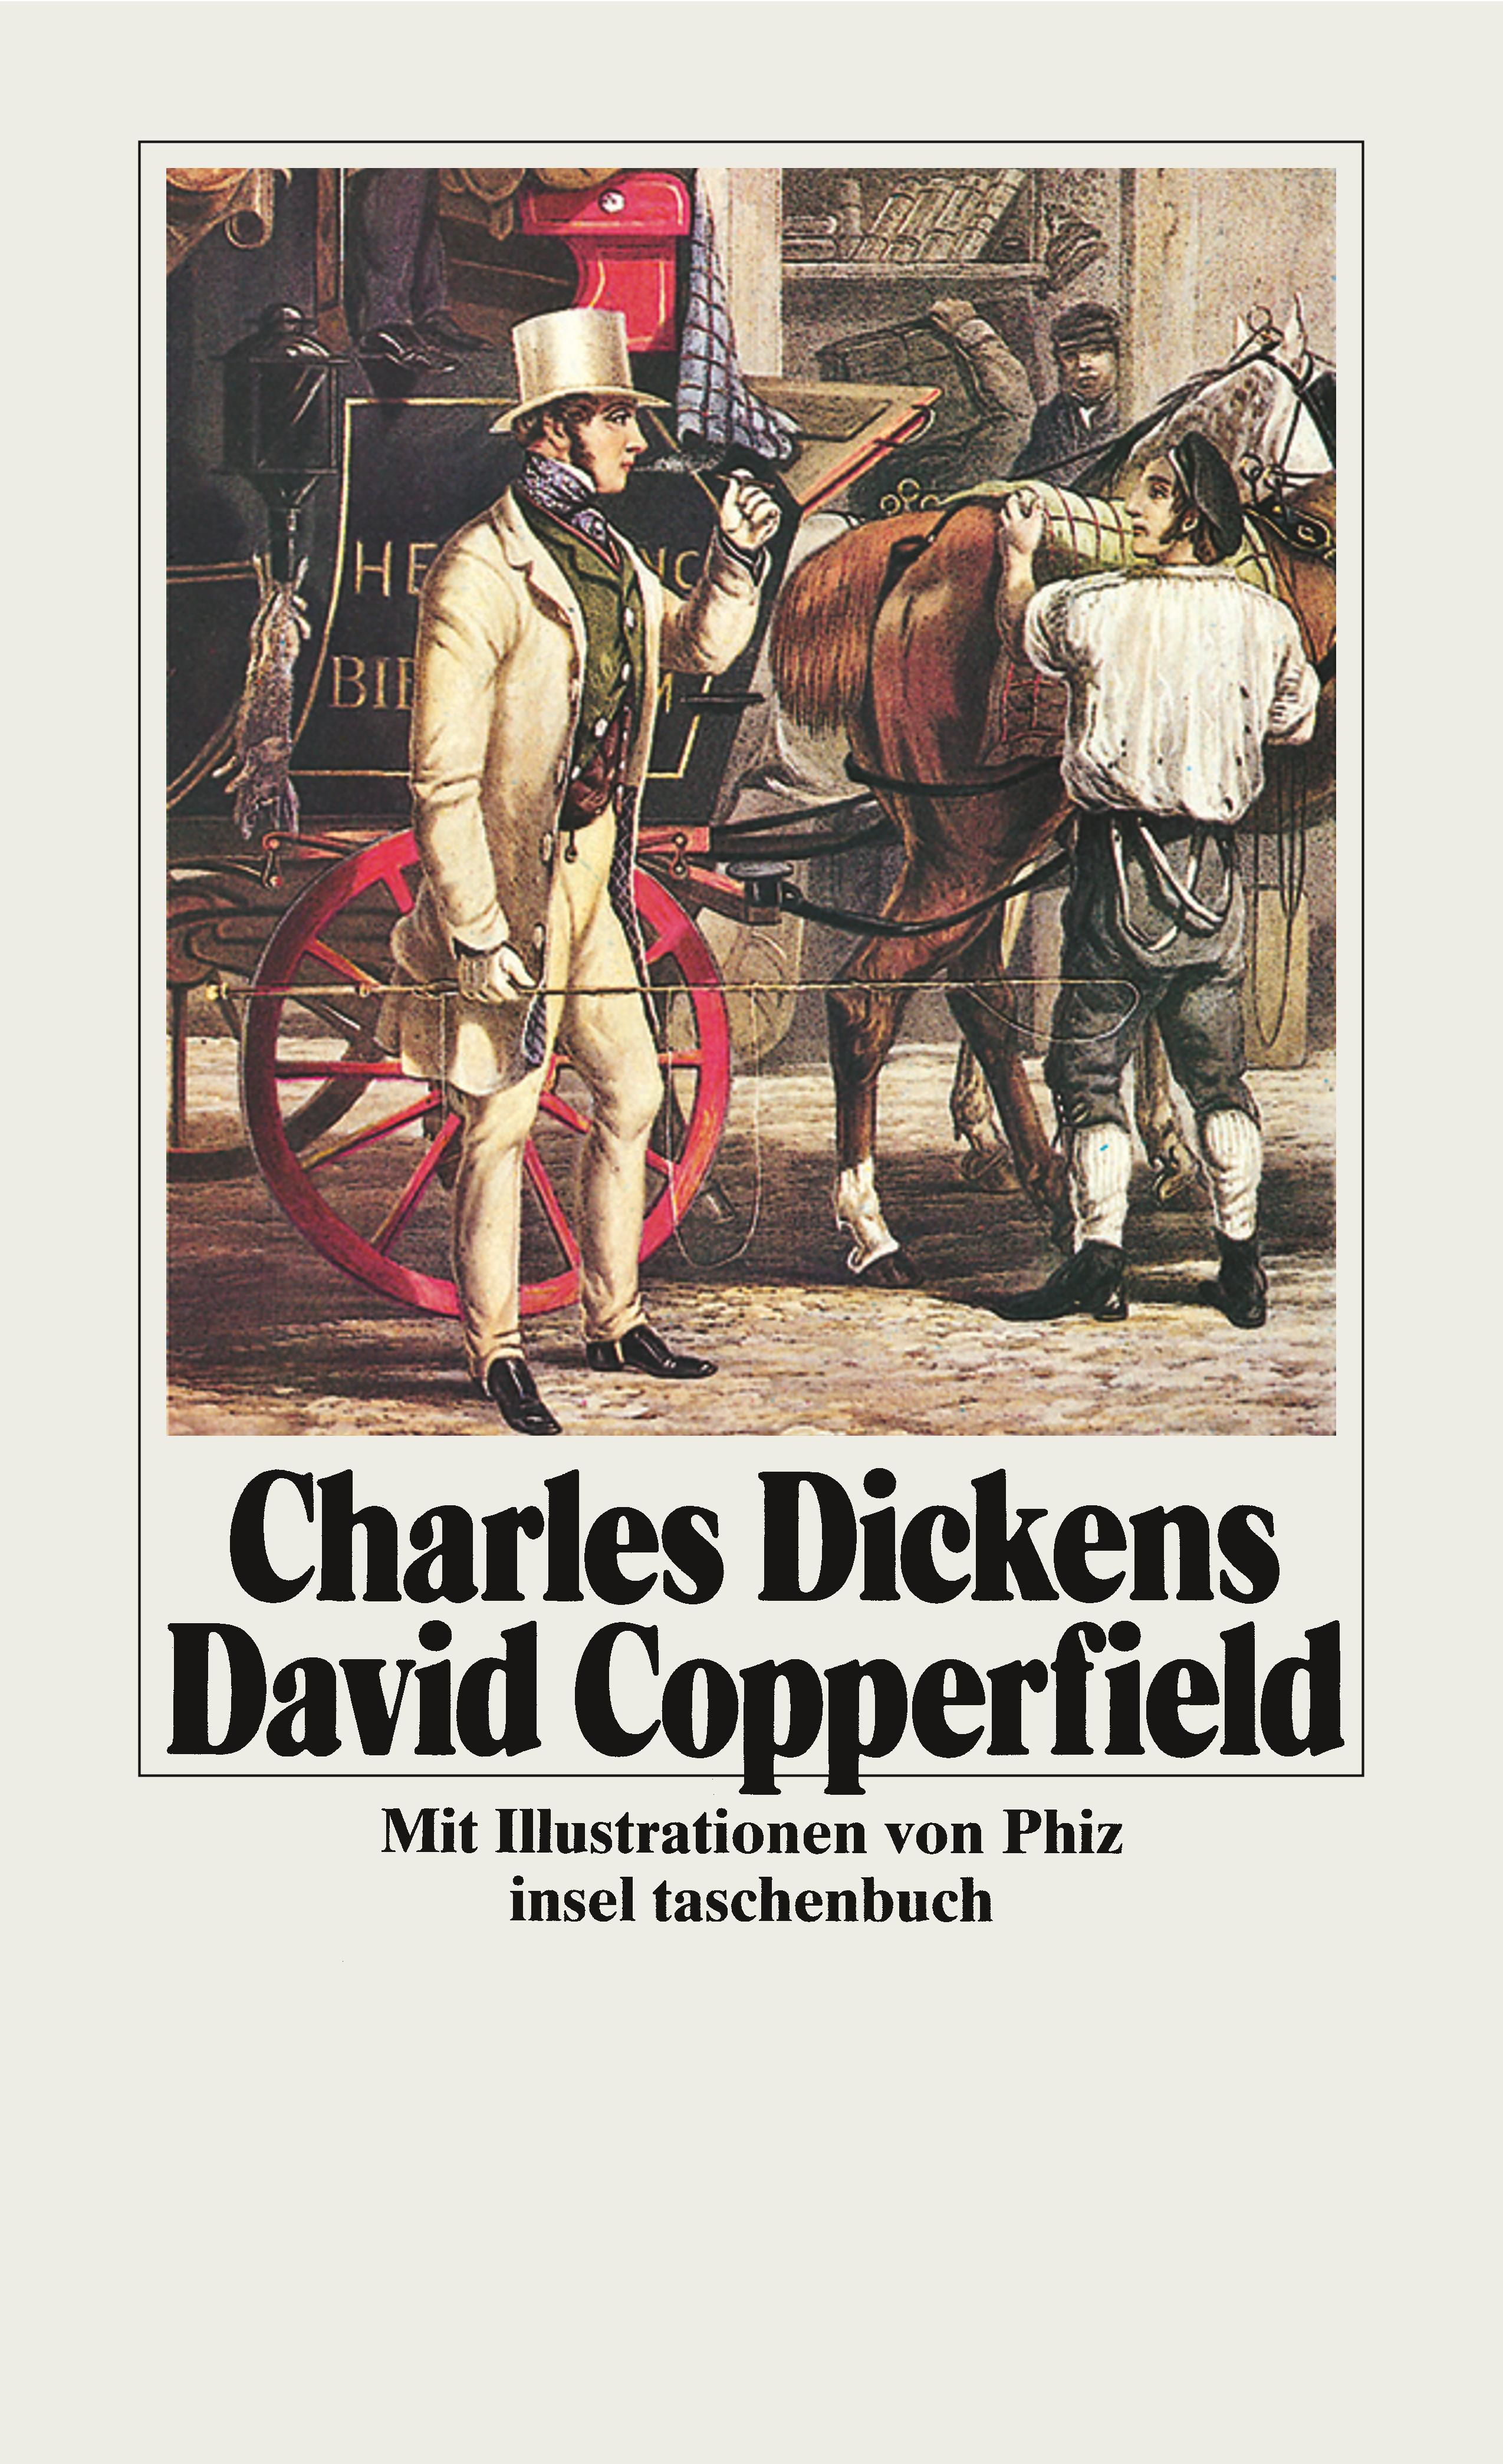 book review of david copperfield by charles dickens